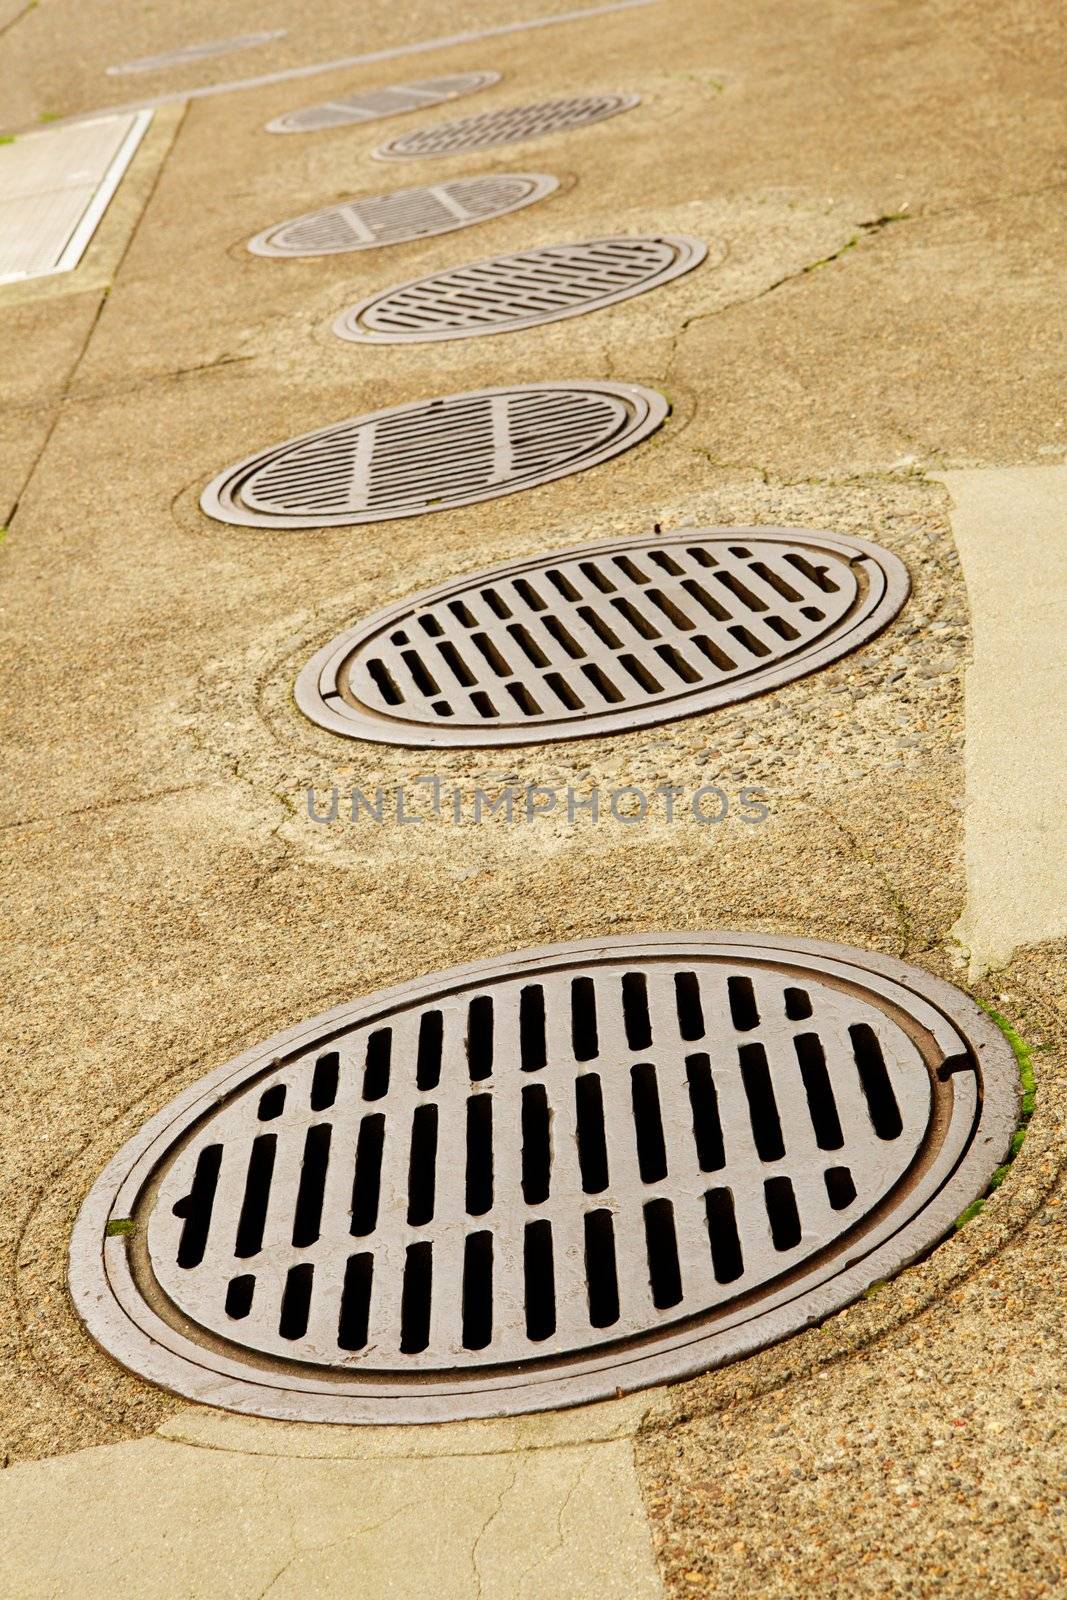 Line up of Sewer Drains by bobkeenan